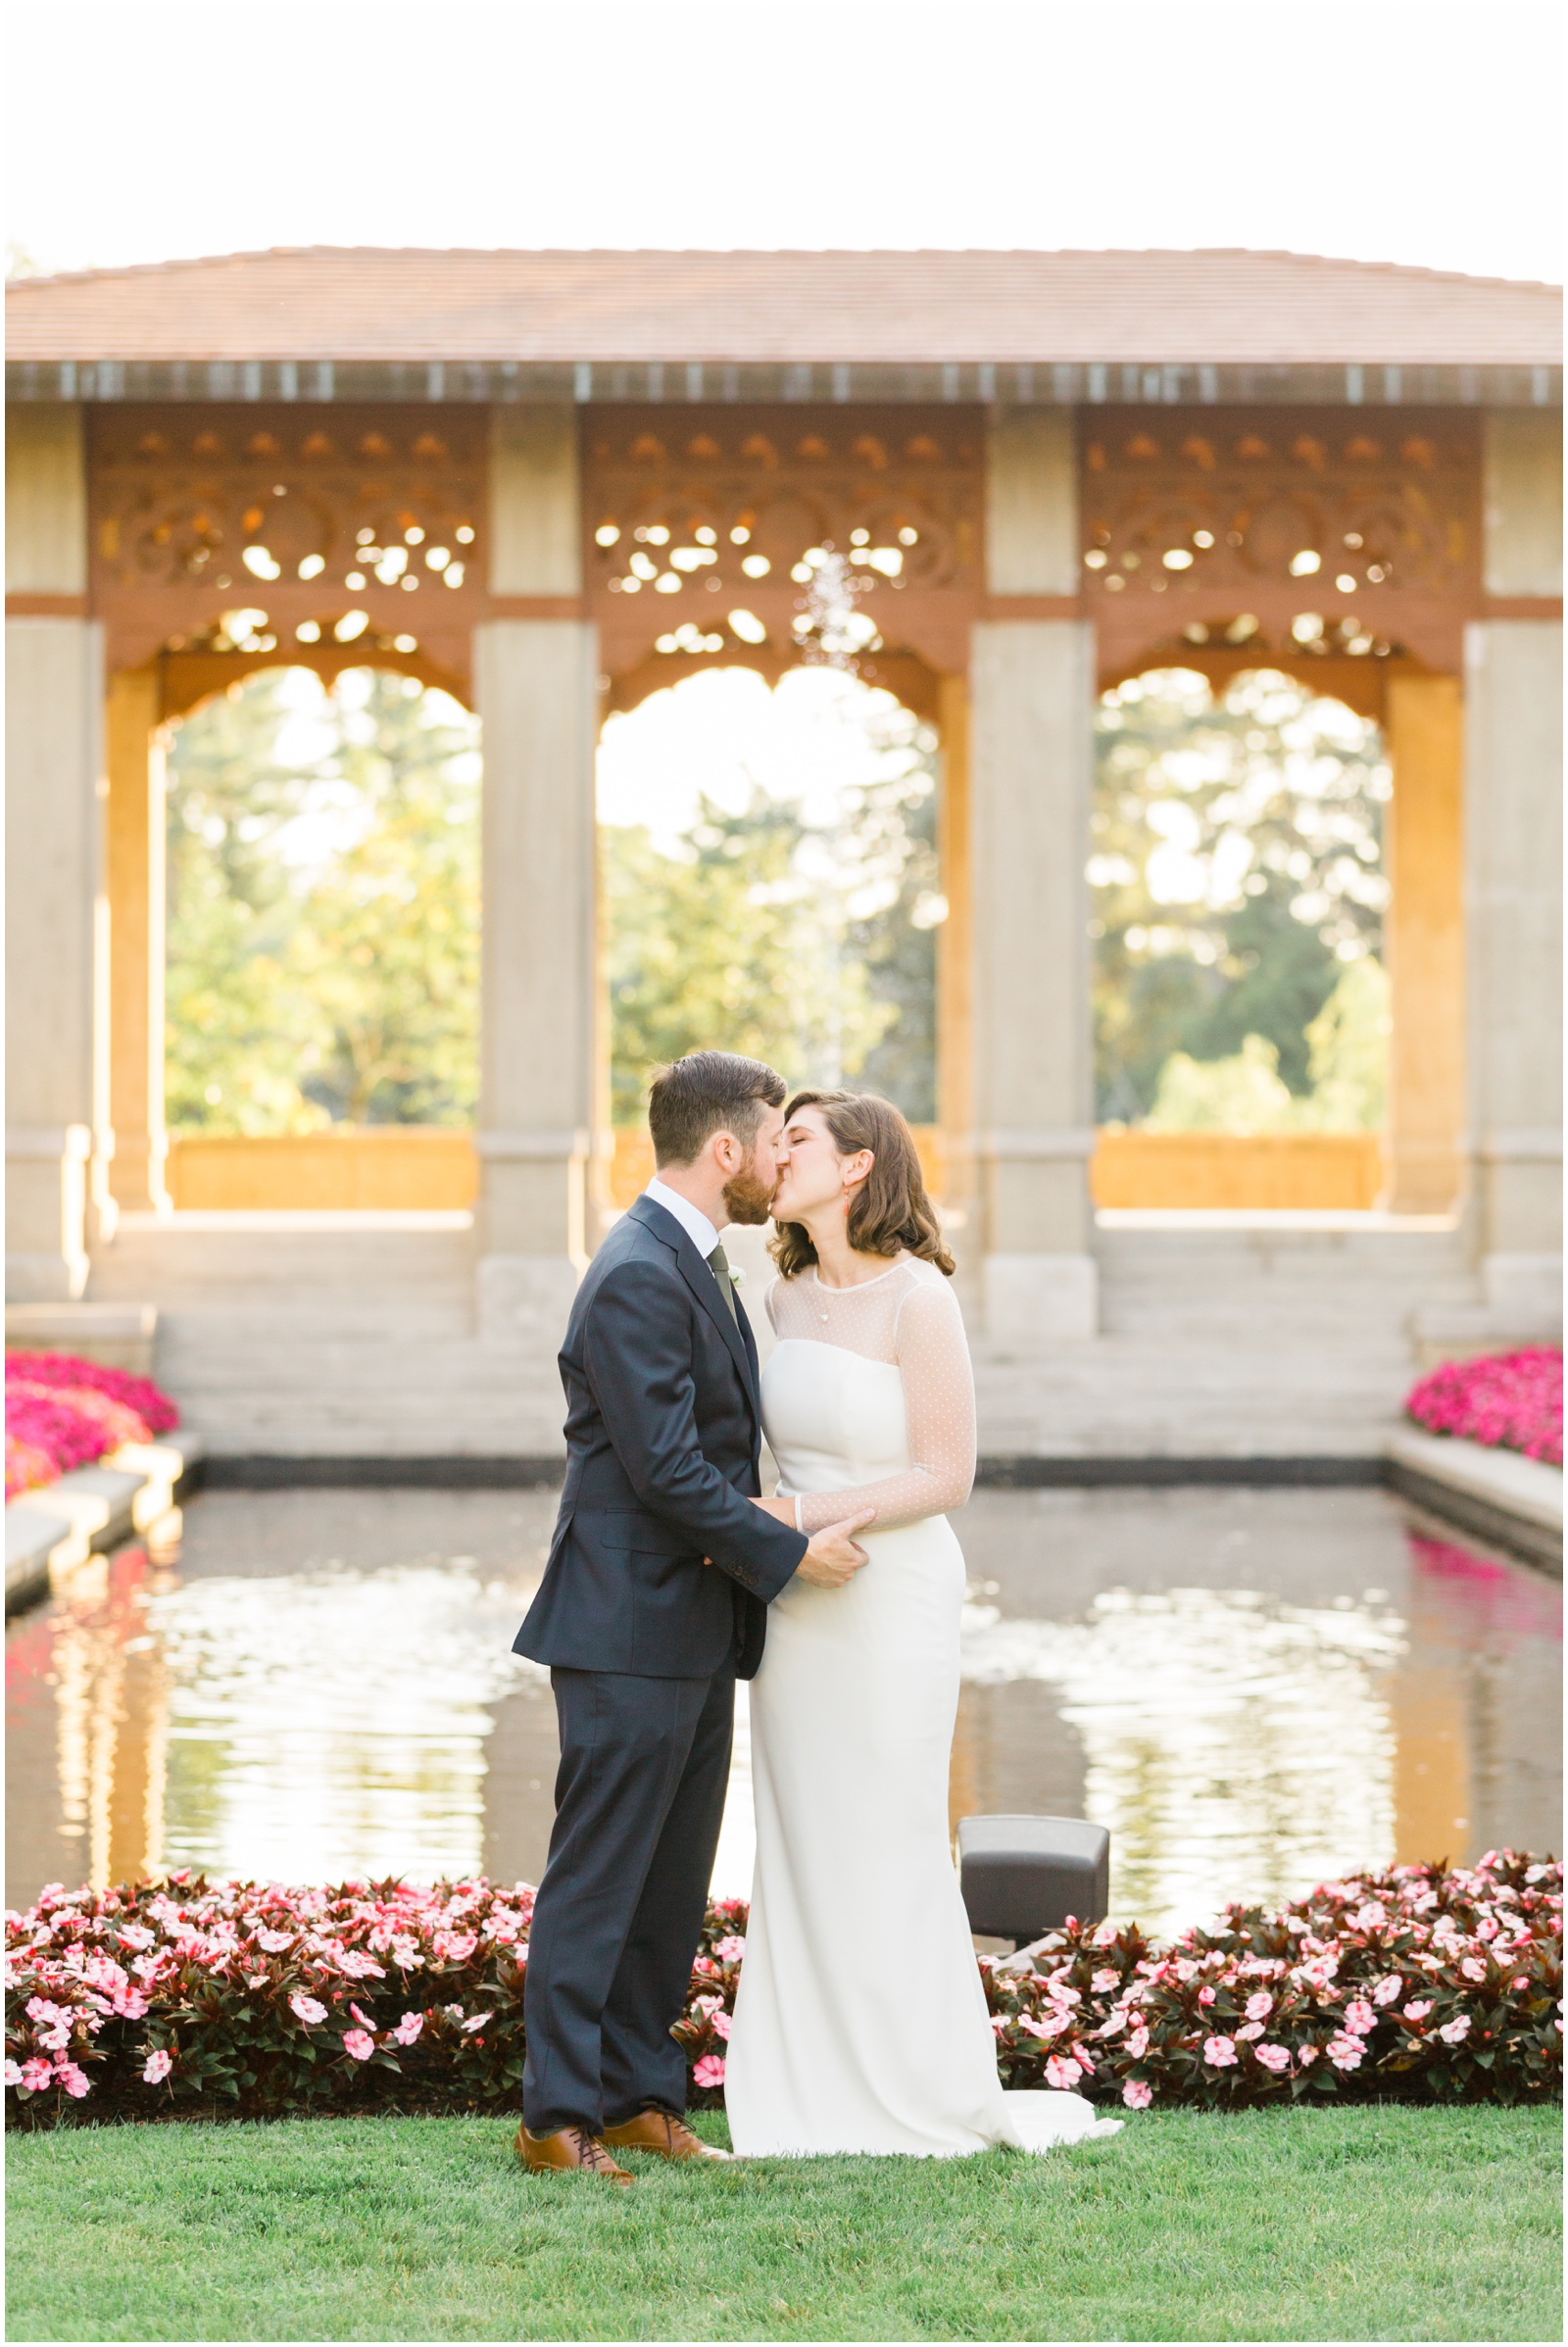 A Formal Micro Wedding in St. Louis